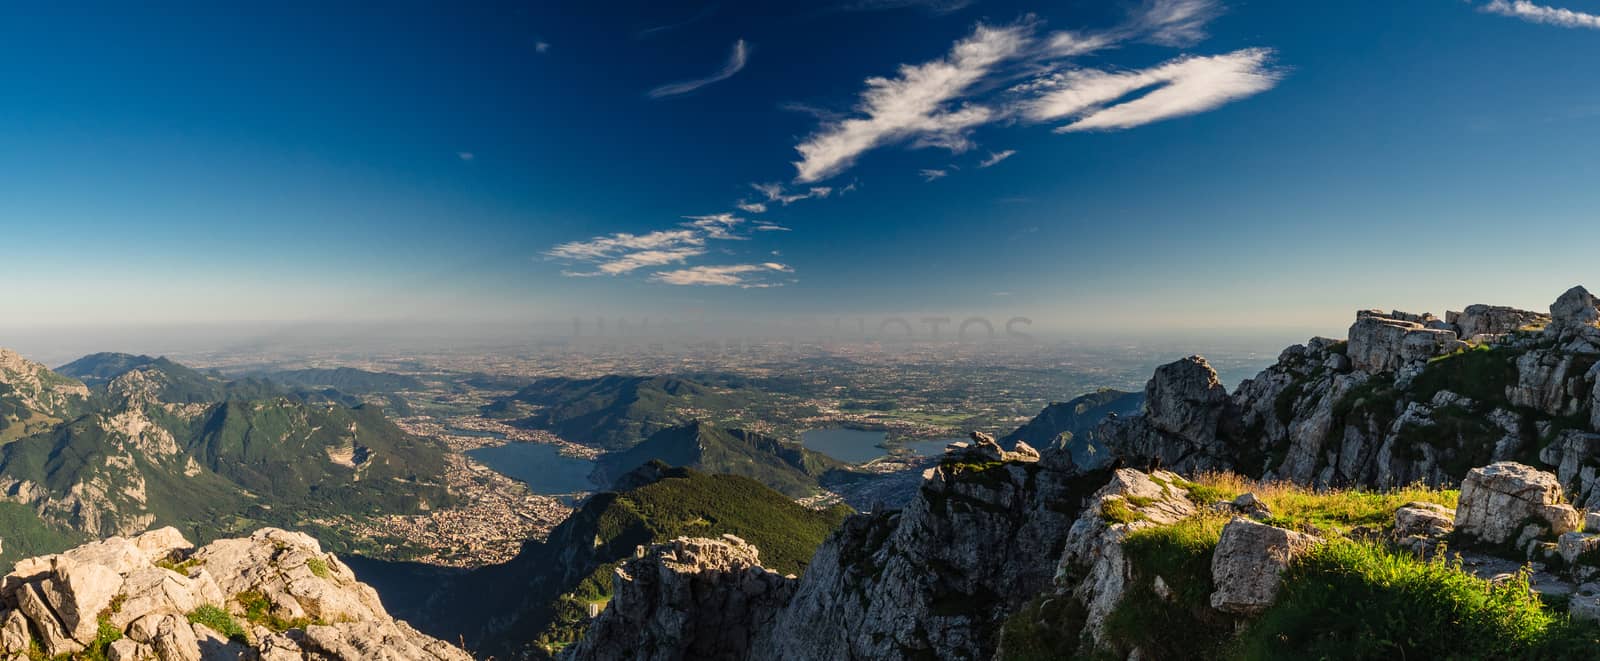 Lecco and Padan Plain by ydsvni